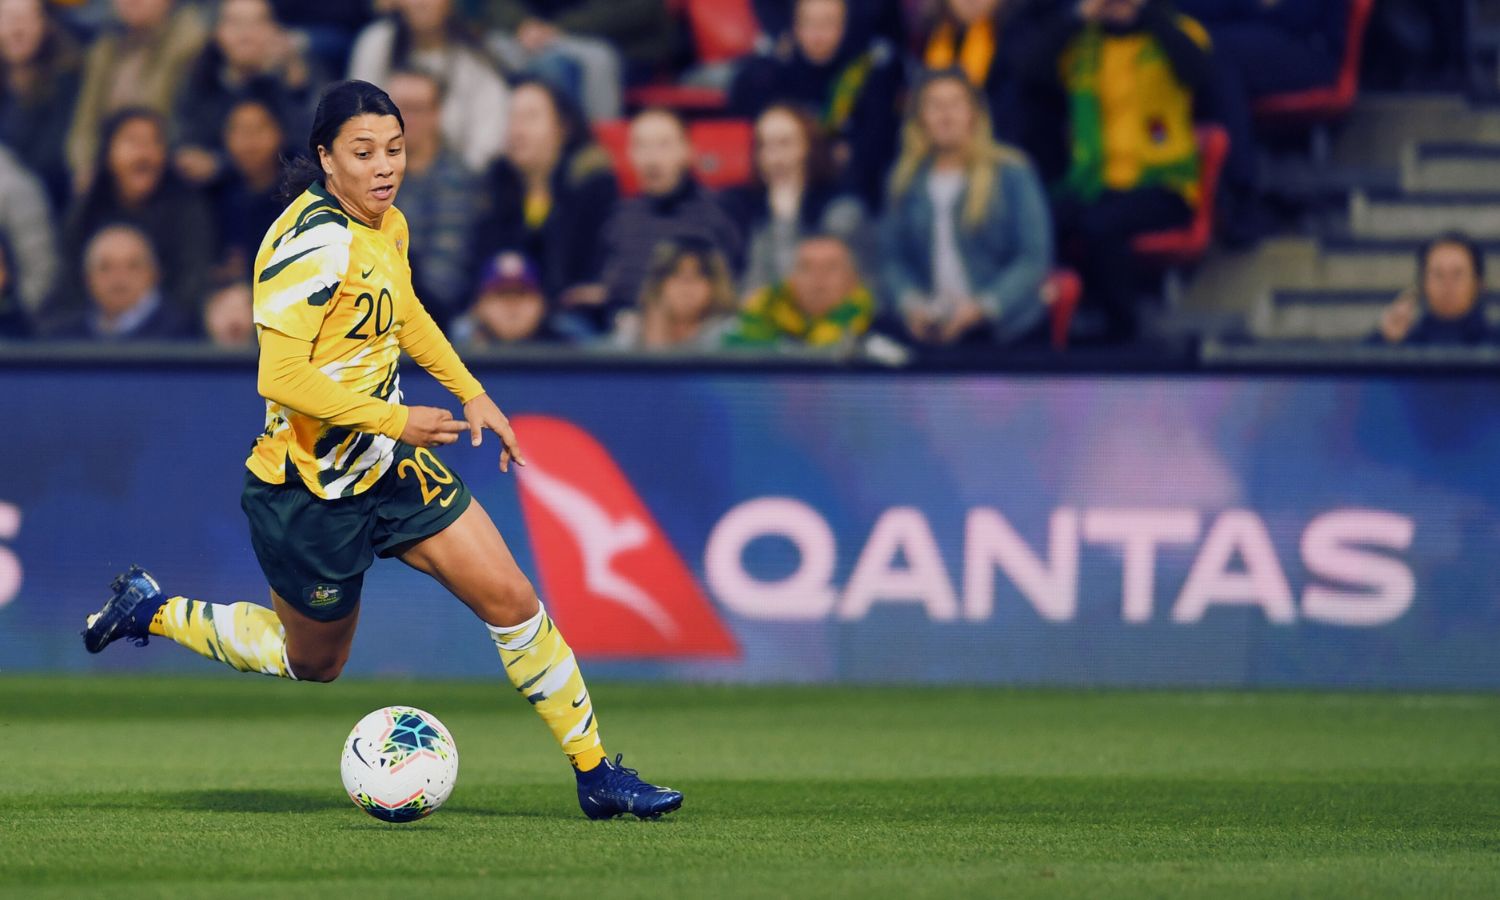 Watch the Socceroos and Matildas live and free on 10 Play - Network Ten